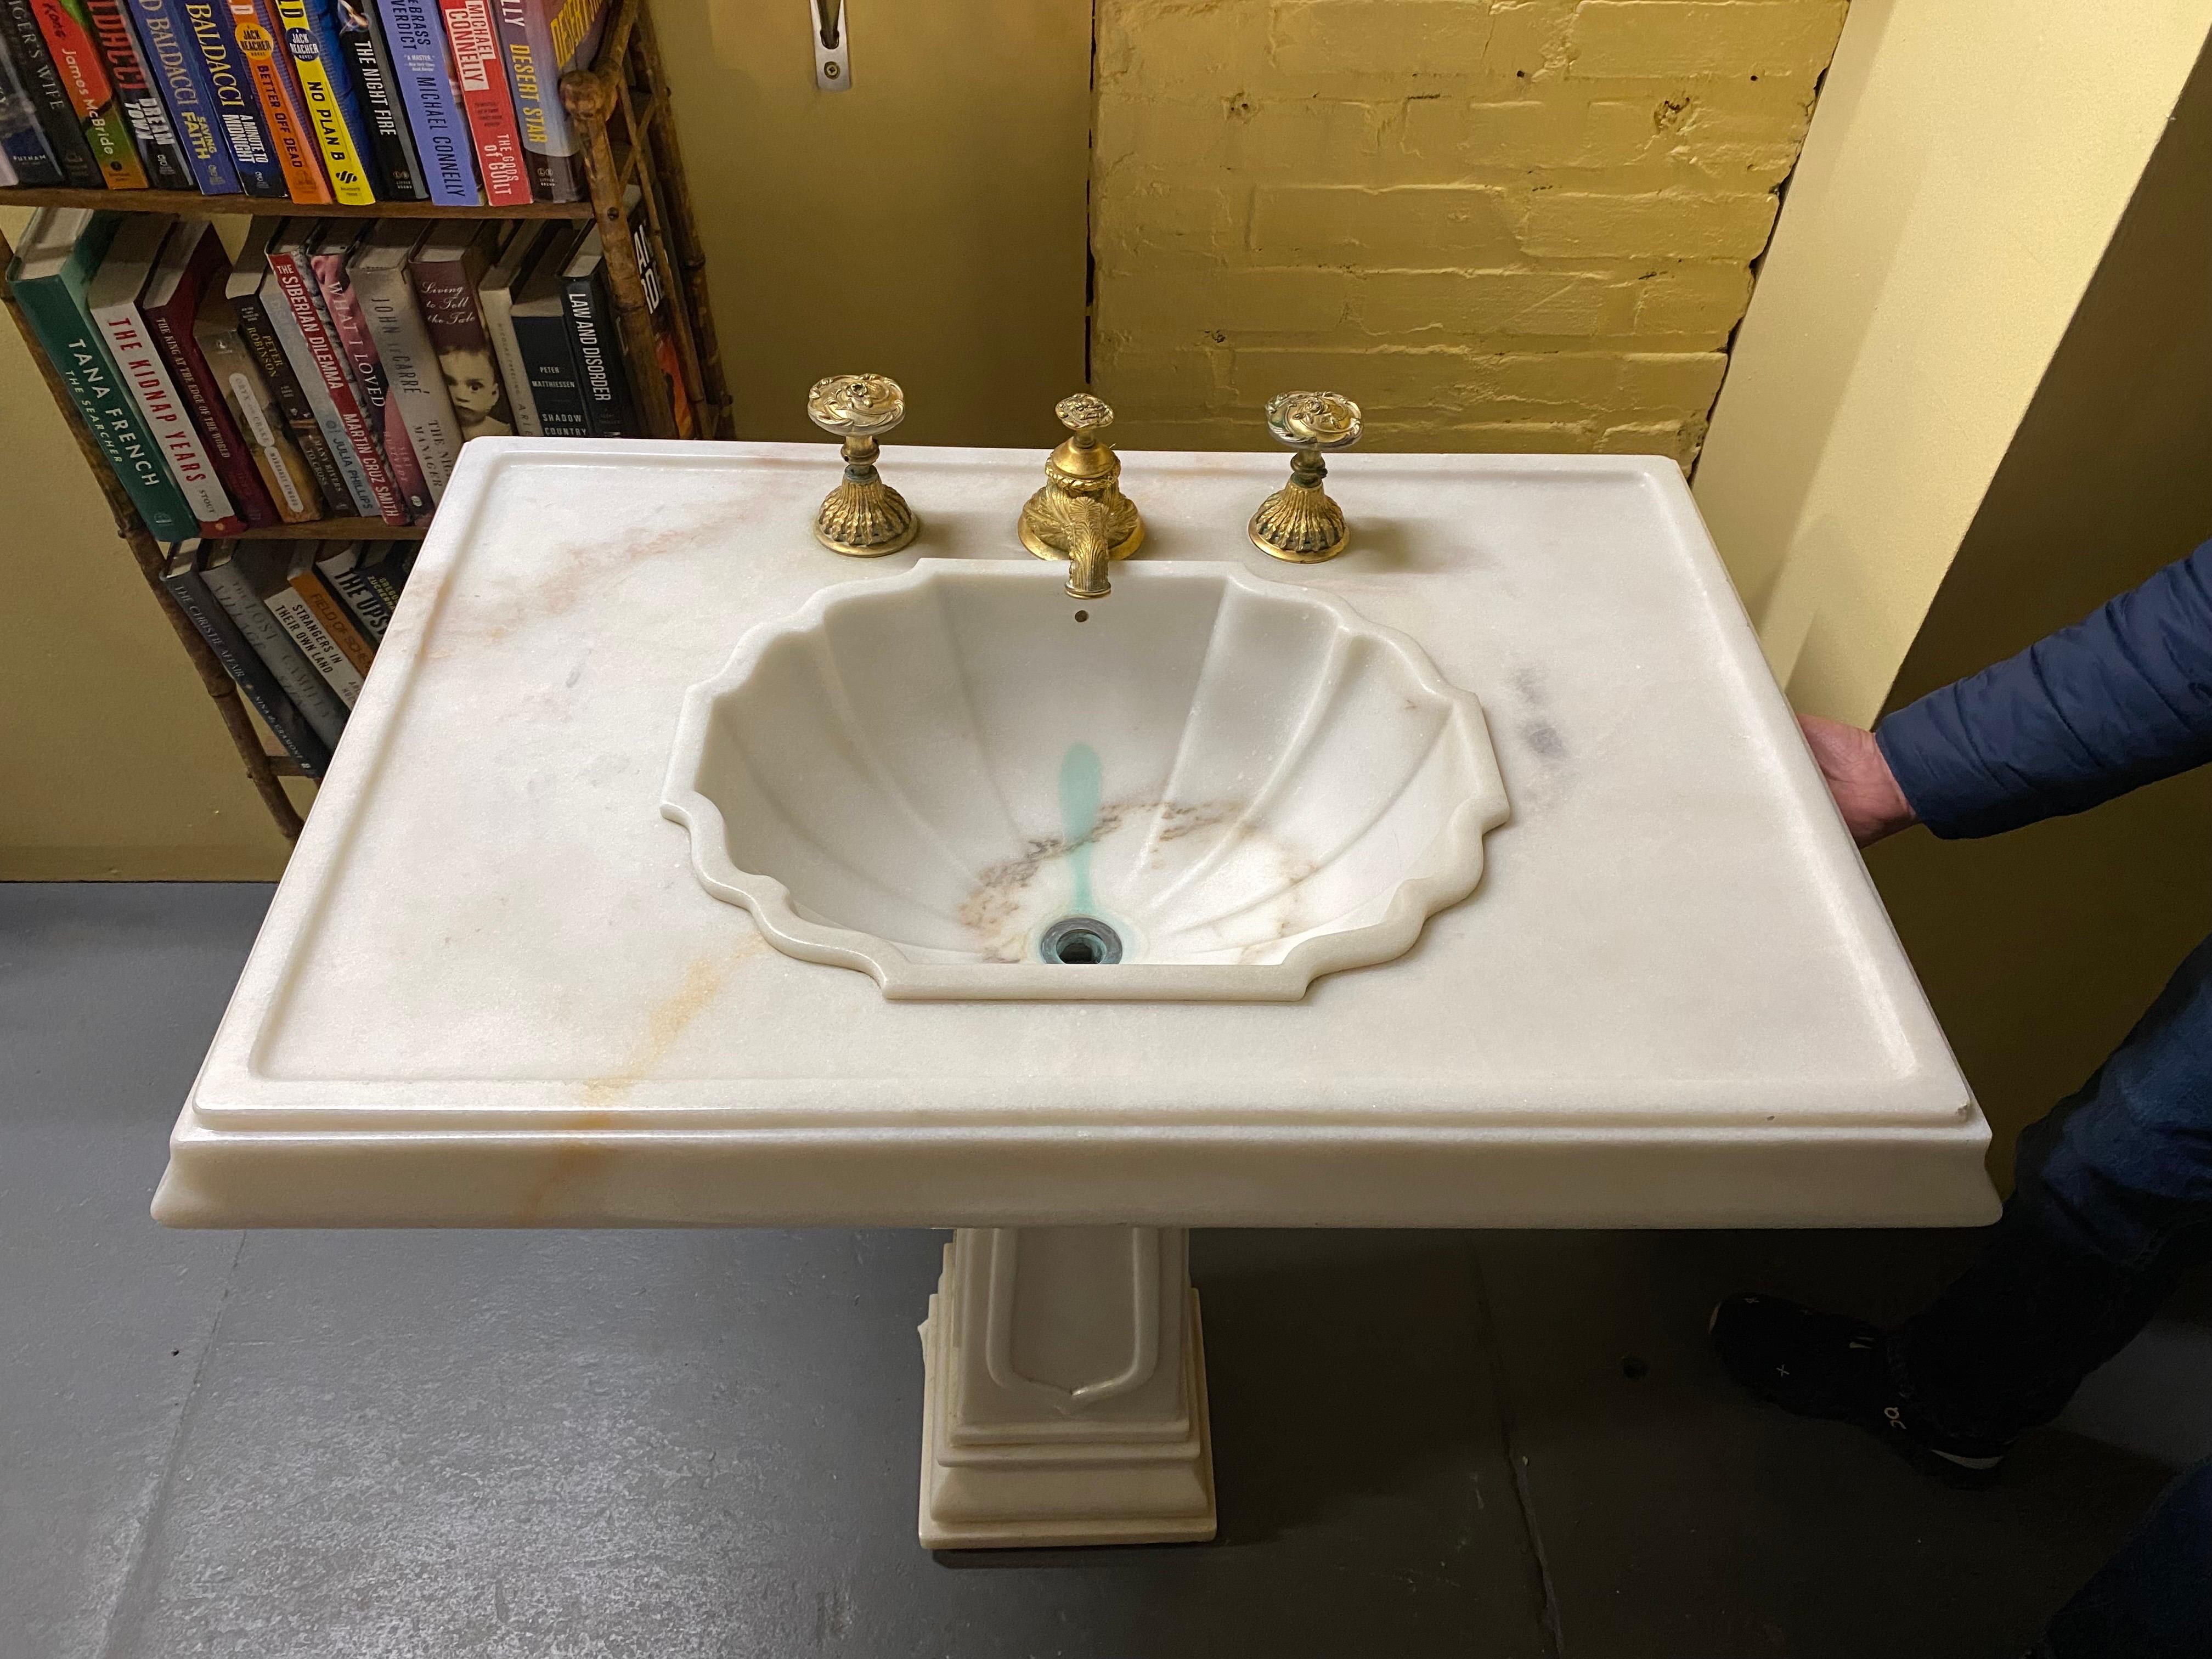 Sherle Wagner pedestal sink with brass Faucets. This sink dates to the 1990's, in overall good condition. Sink bowl shows pale green coloring from water. The brown ring is the marbling of the stone. A little edge wear but no chips or cracks. Top